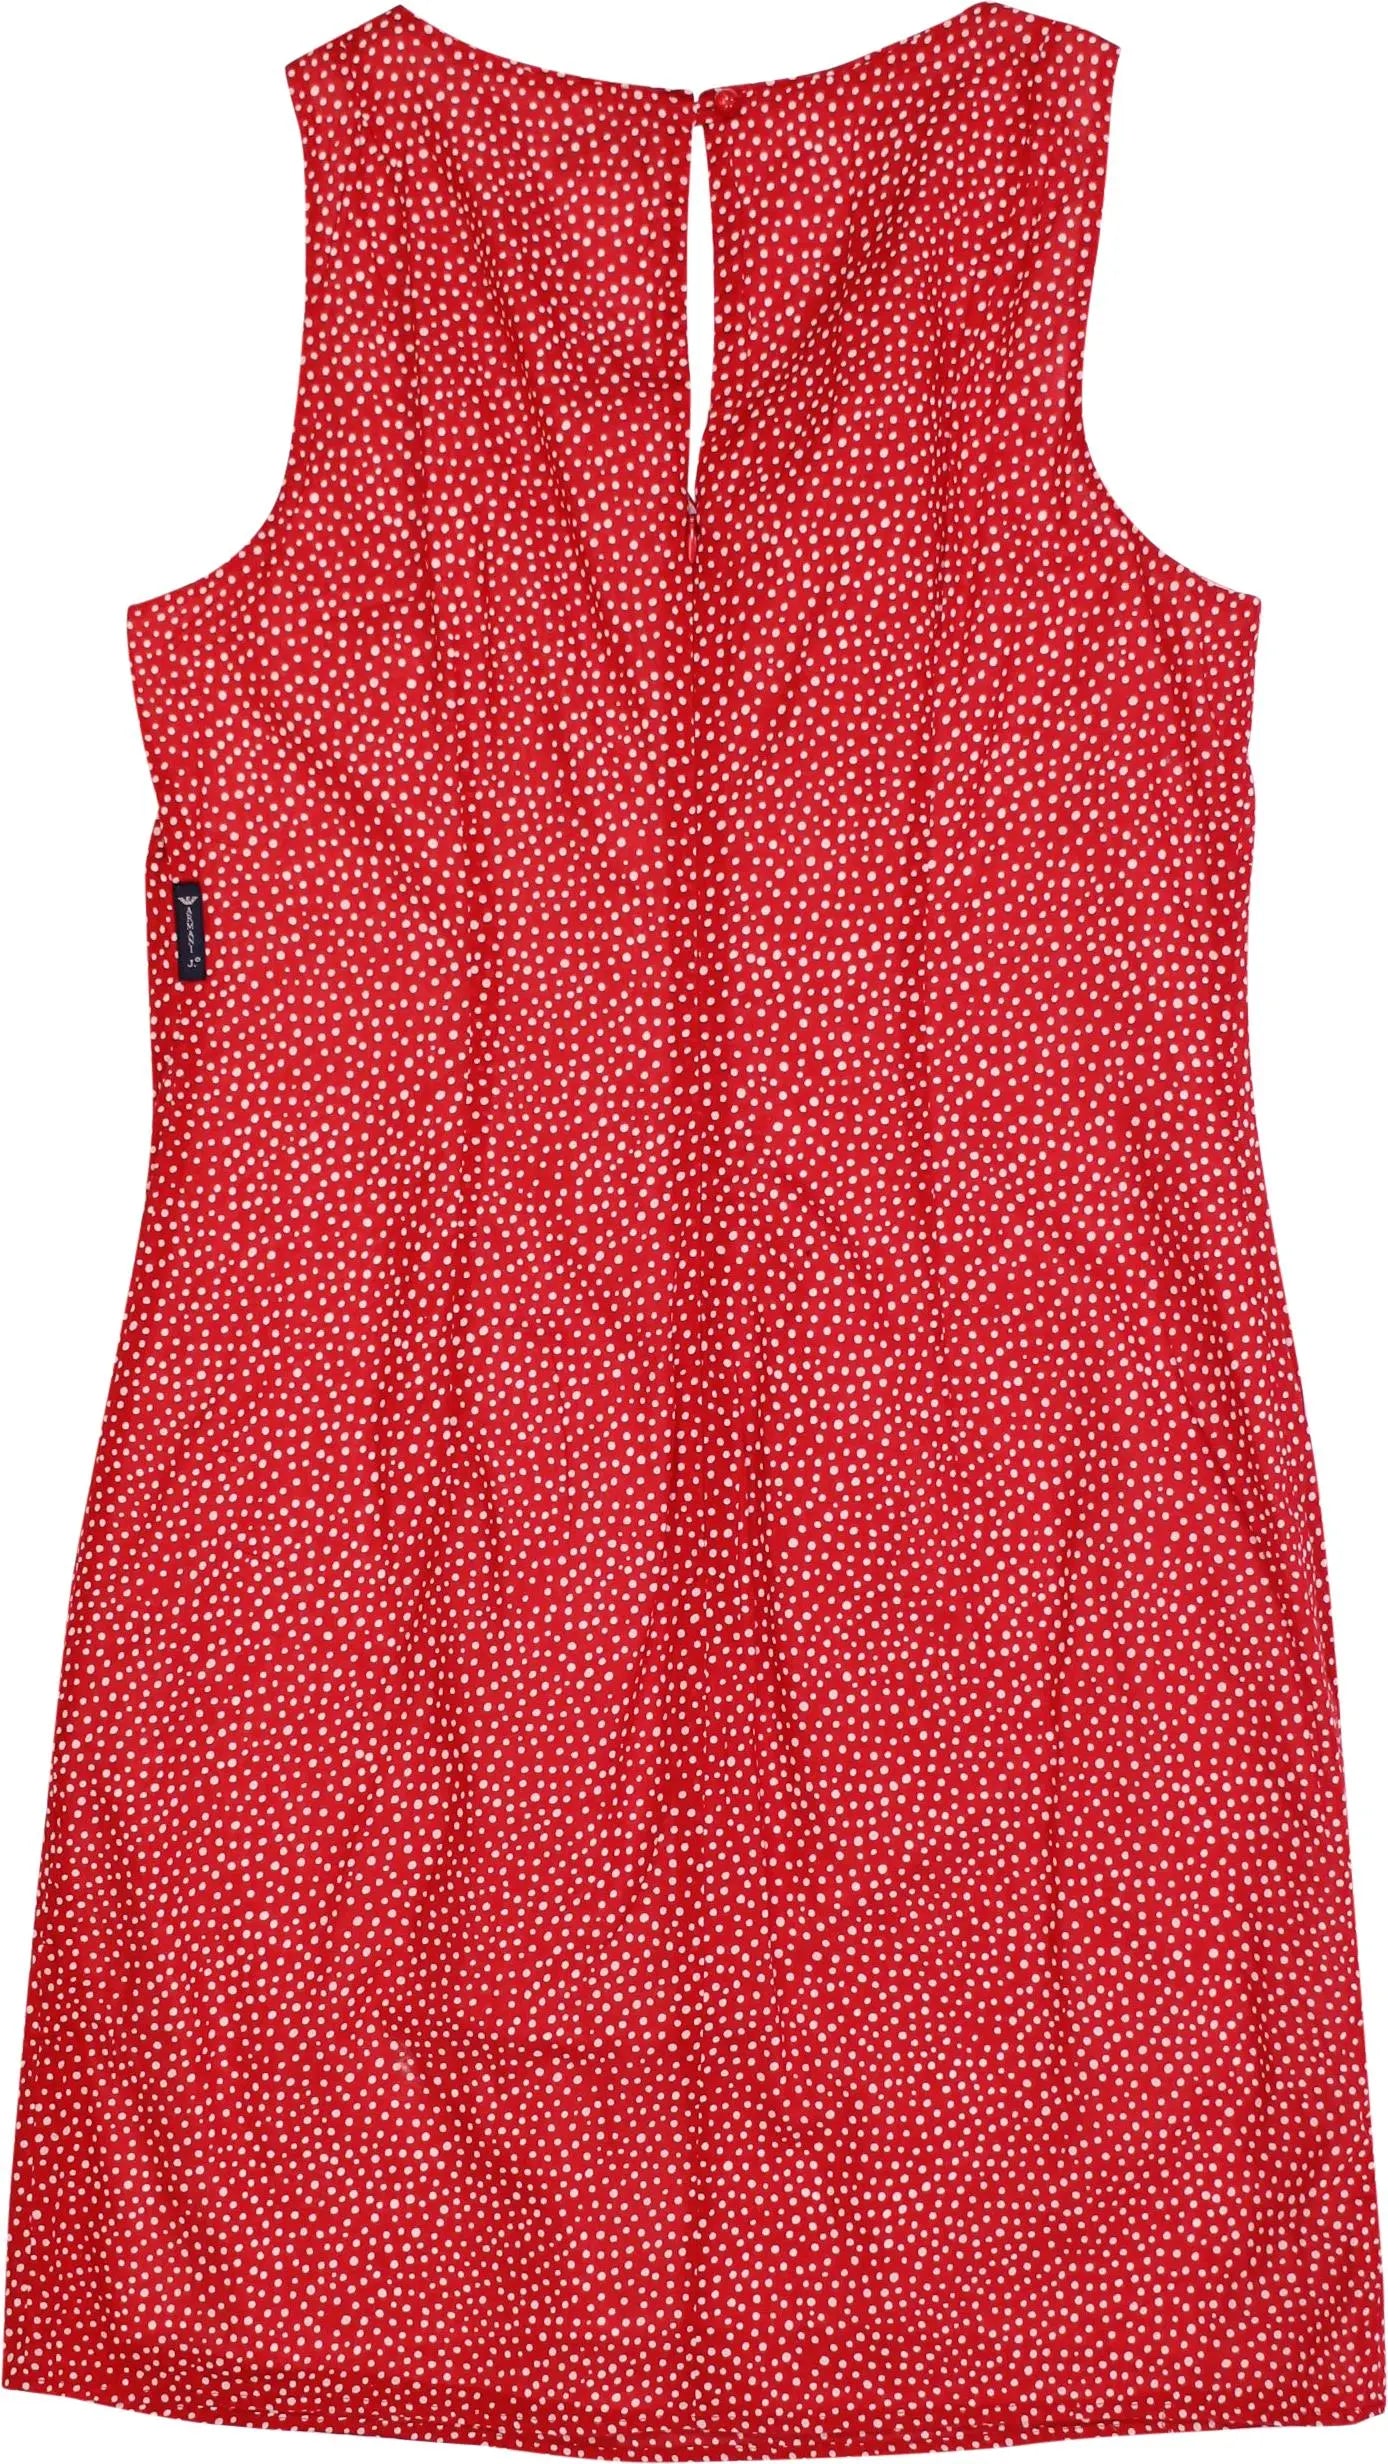 Armani Jeans - Polka Dot Dress by Armani Jeans- ThriftTale.com - Vintage and second handclothing